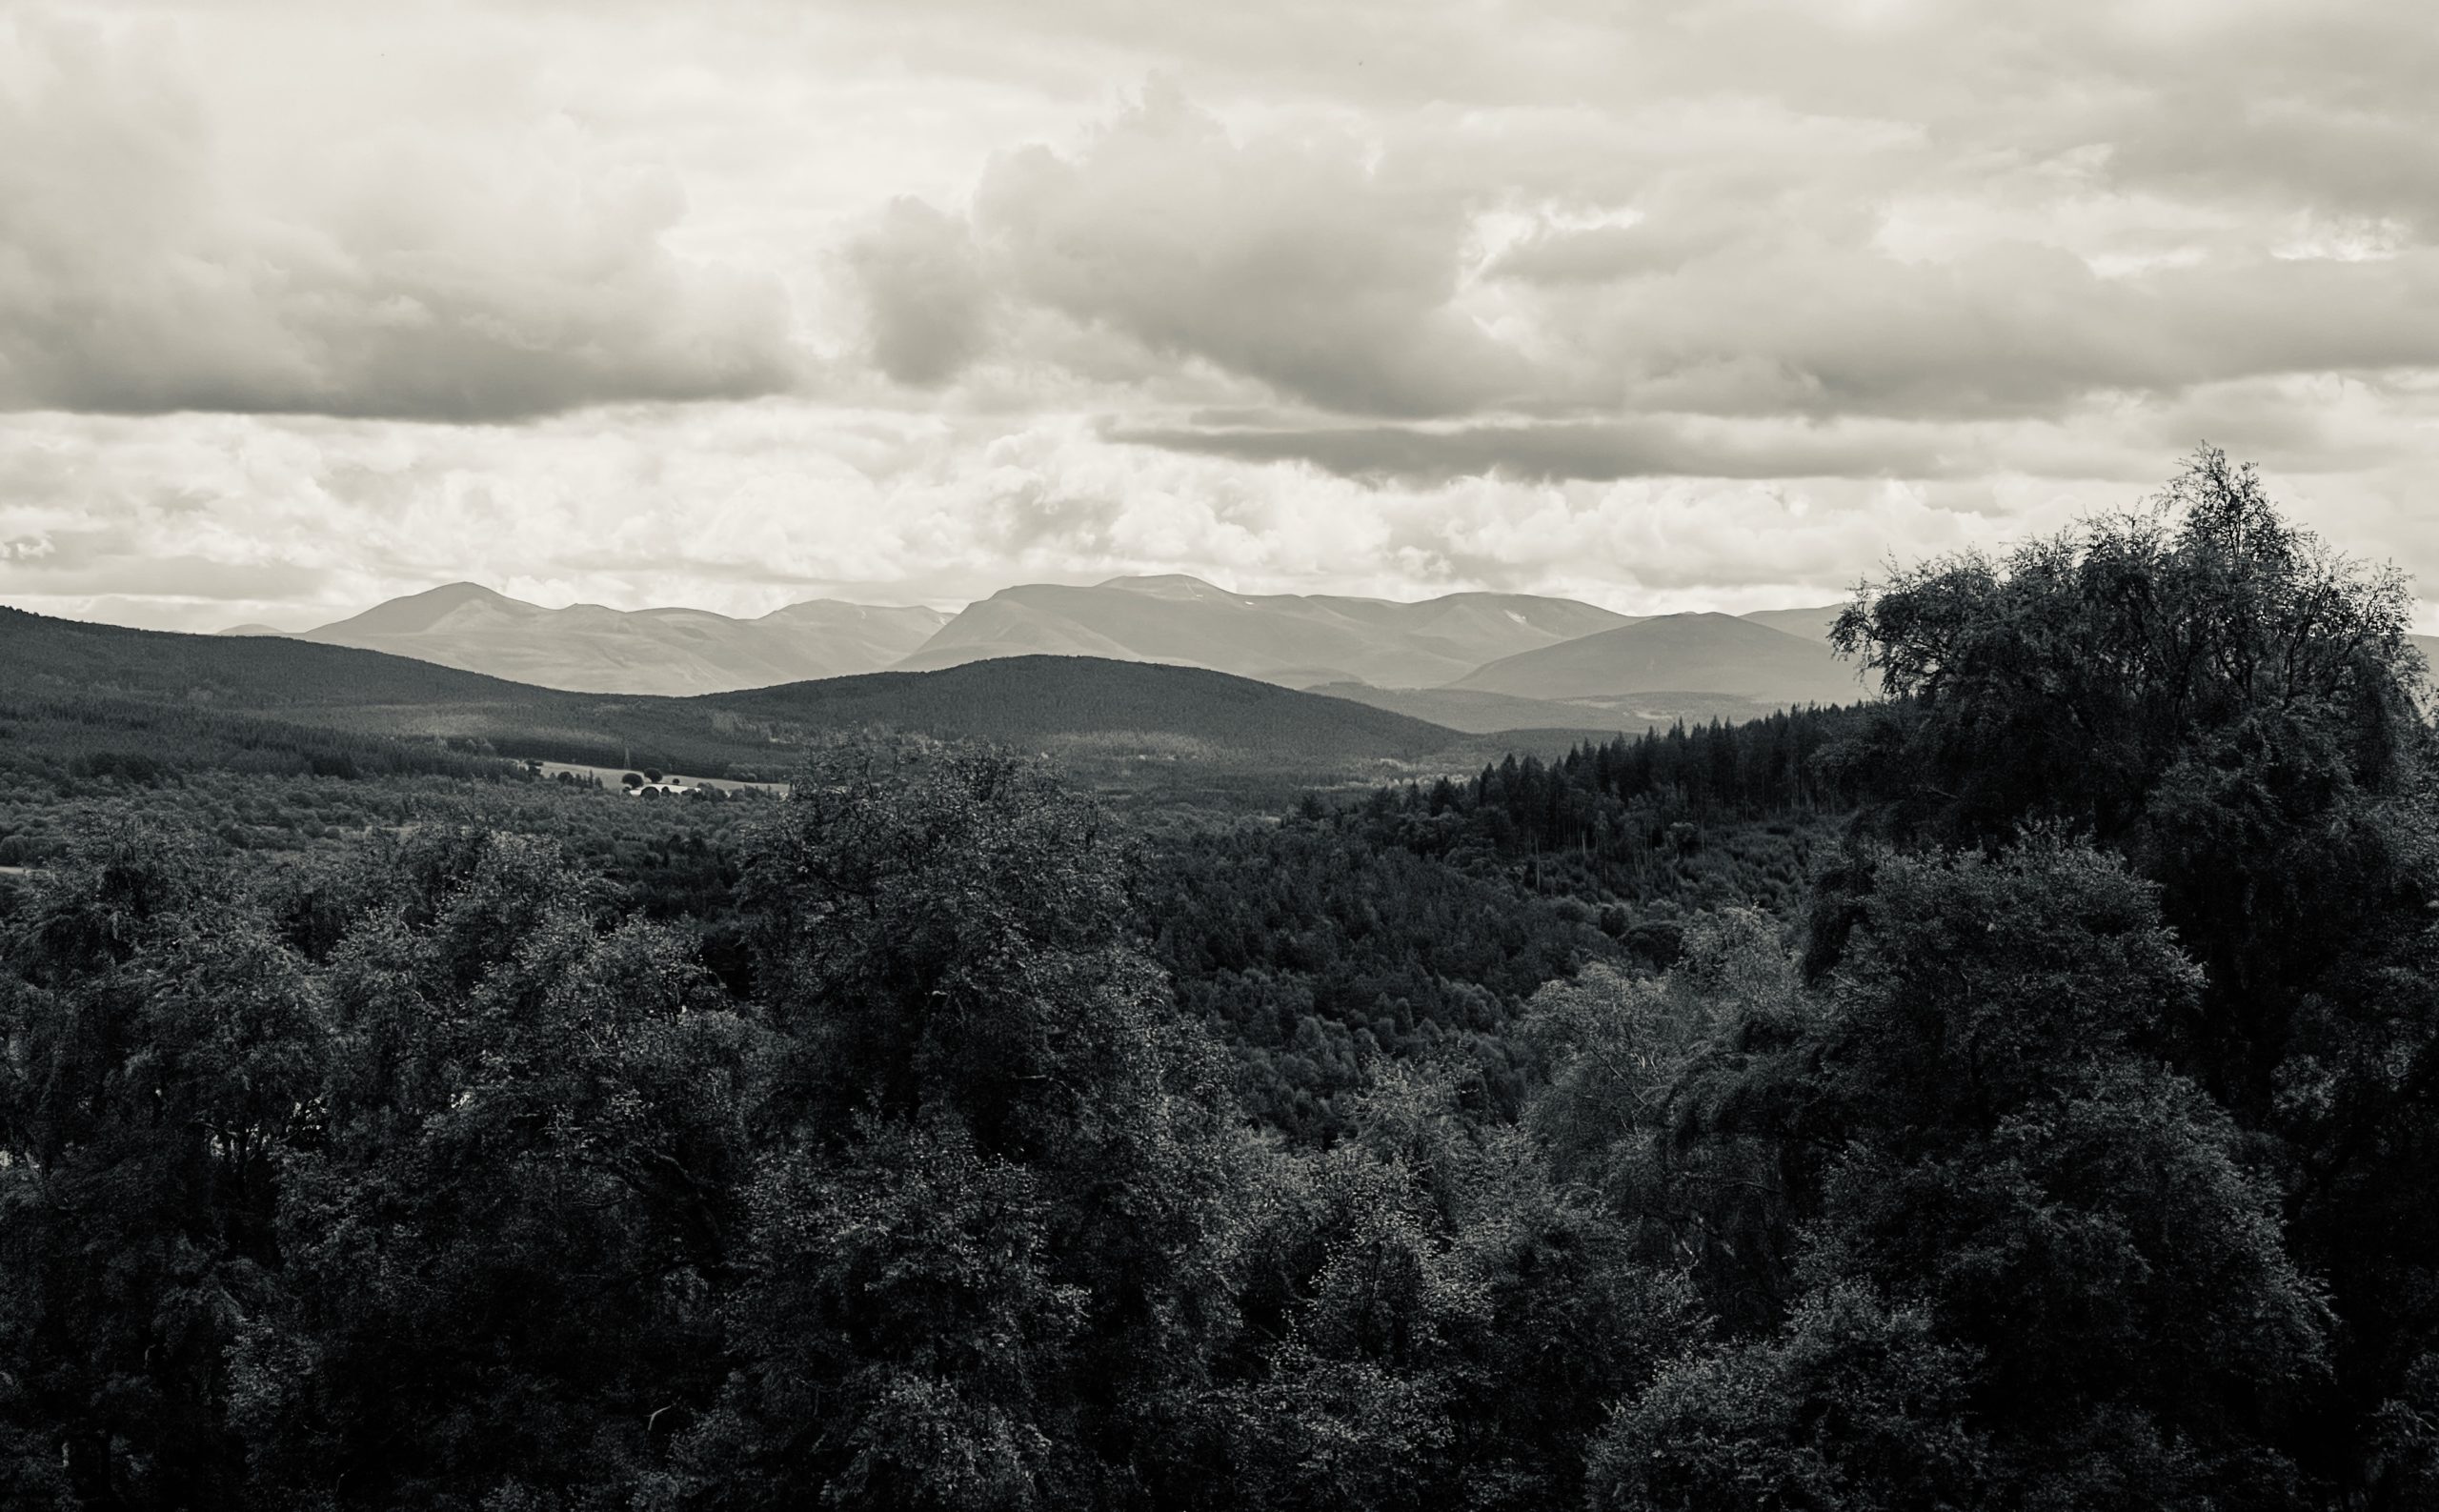 Cairngorm Mountains from The Dava Way